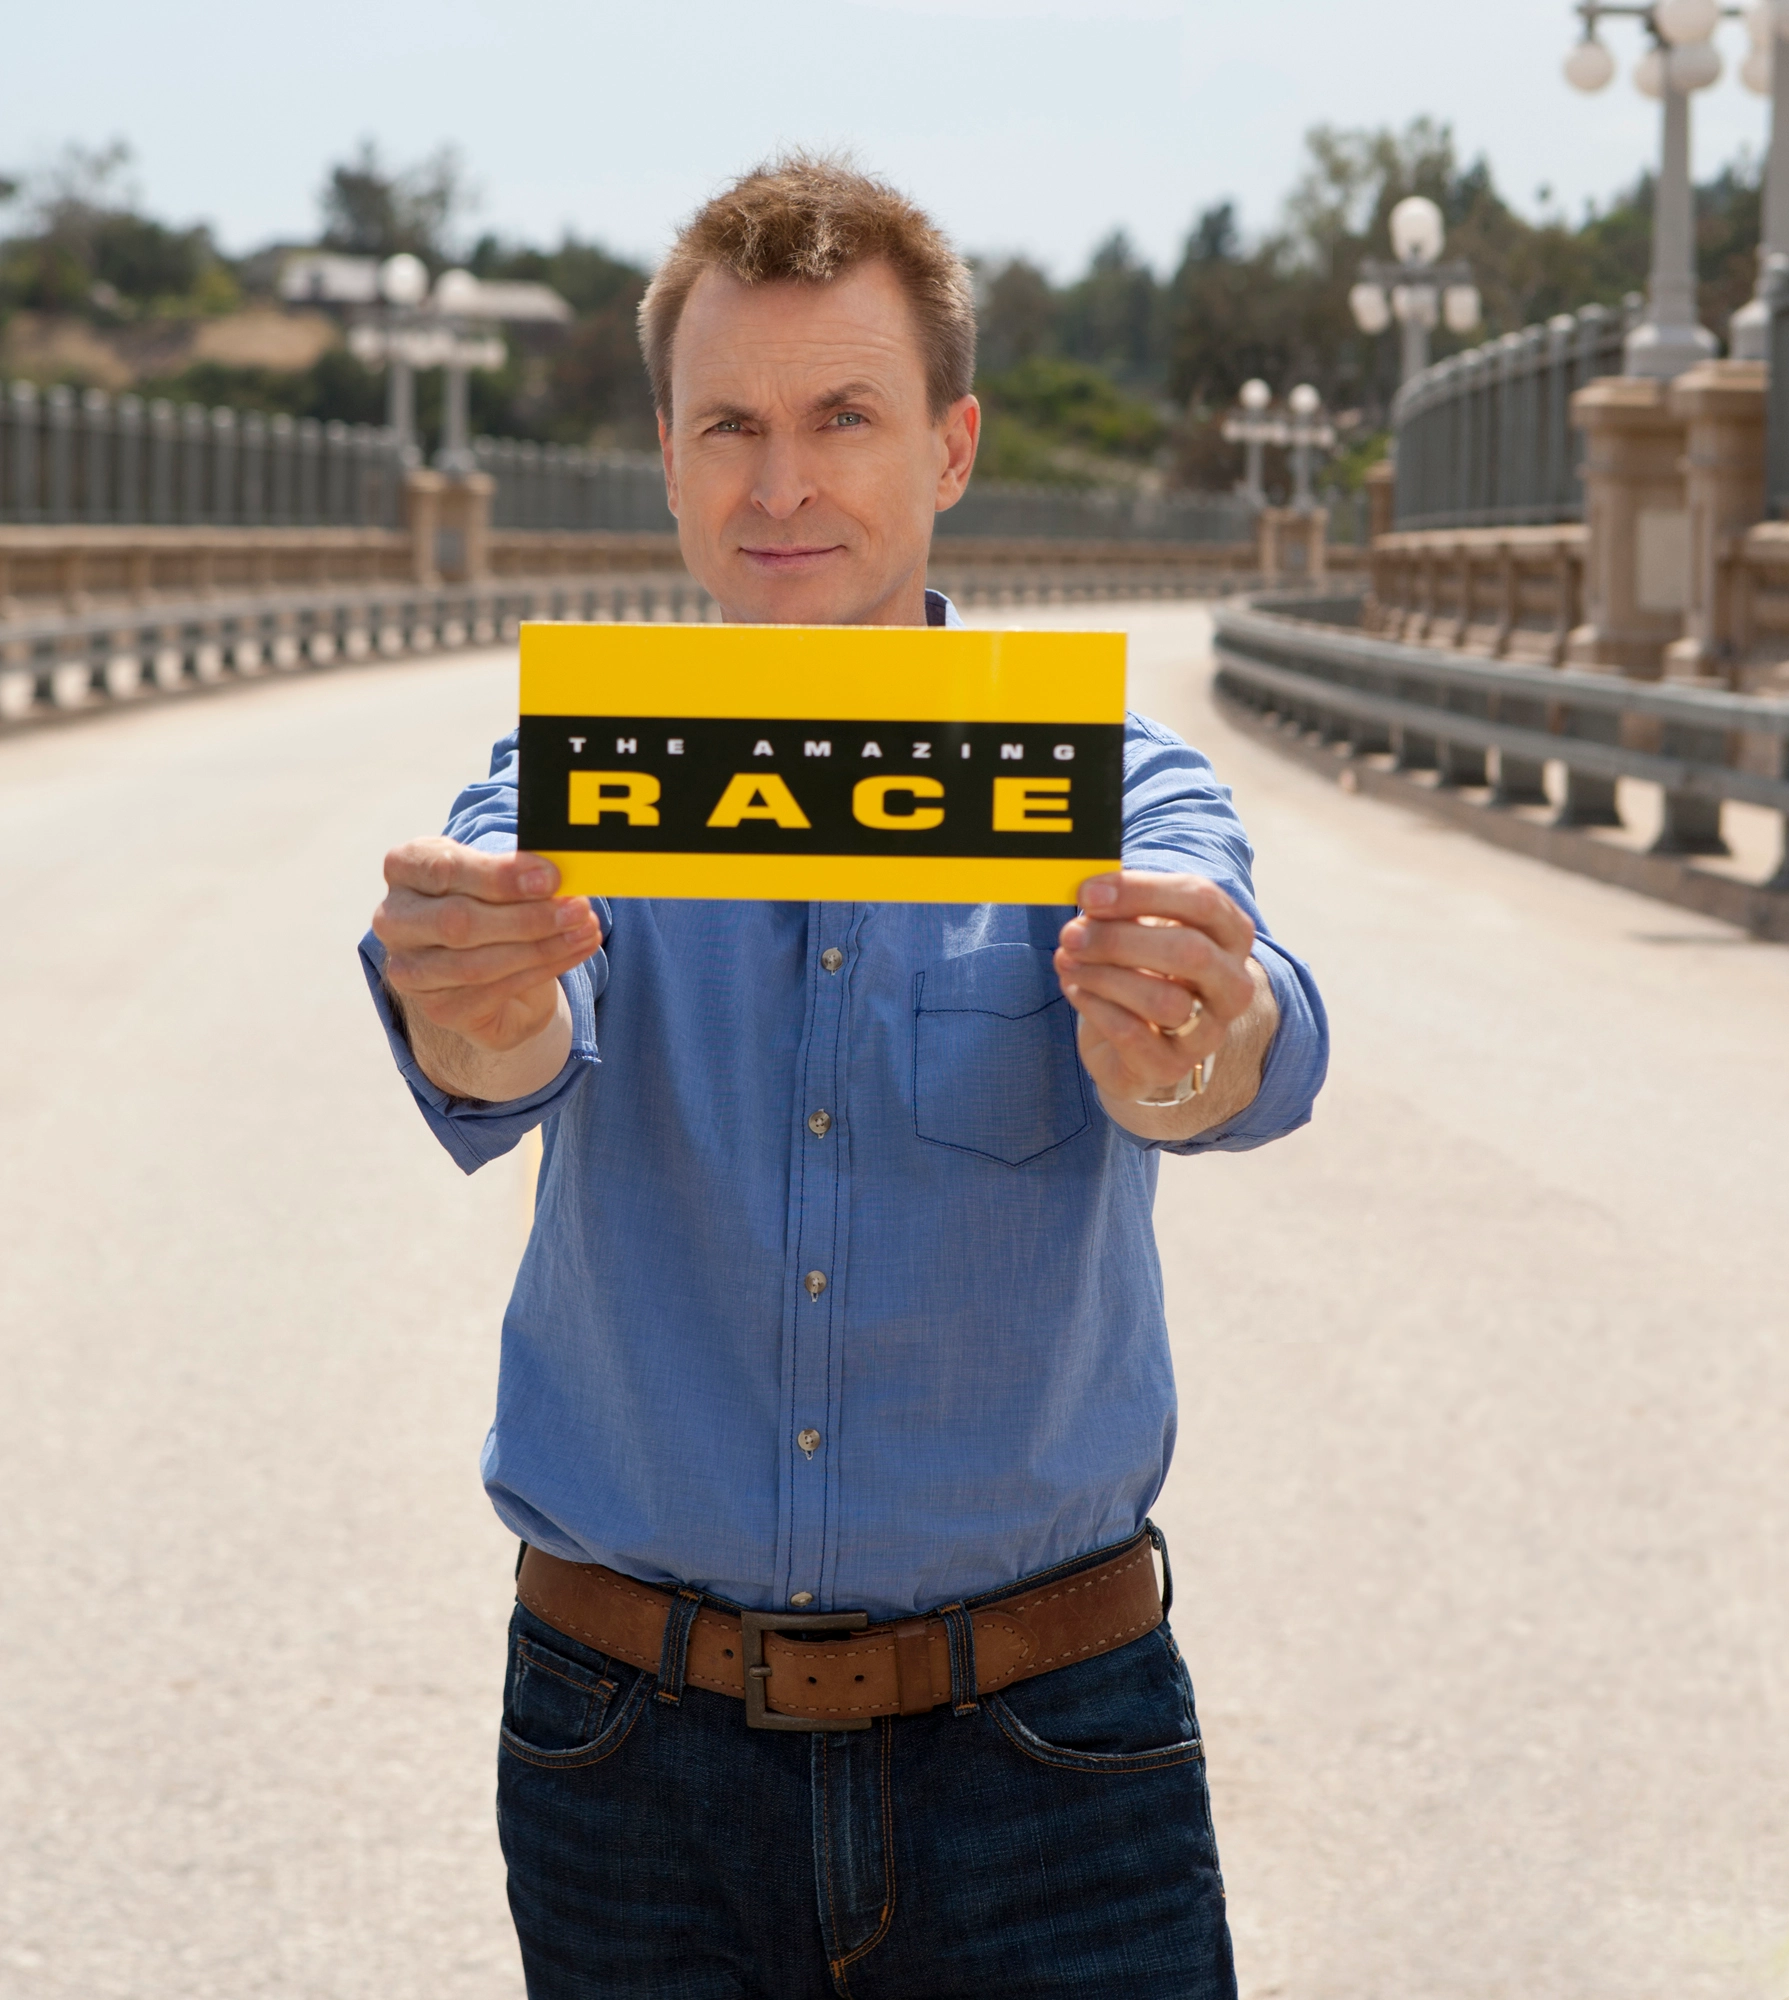 “The Amazing Race” with secret messages throughout the journey